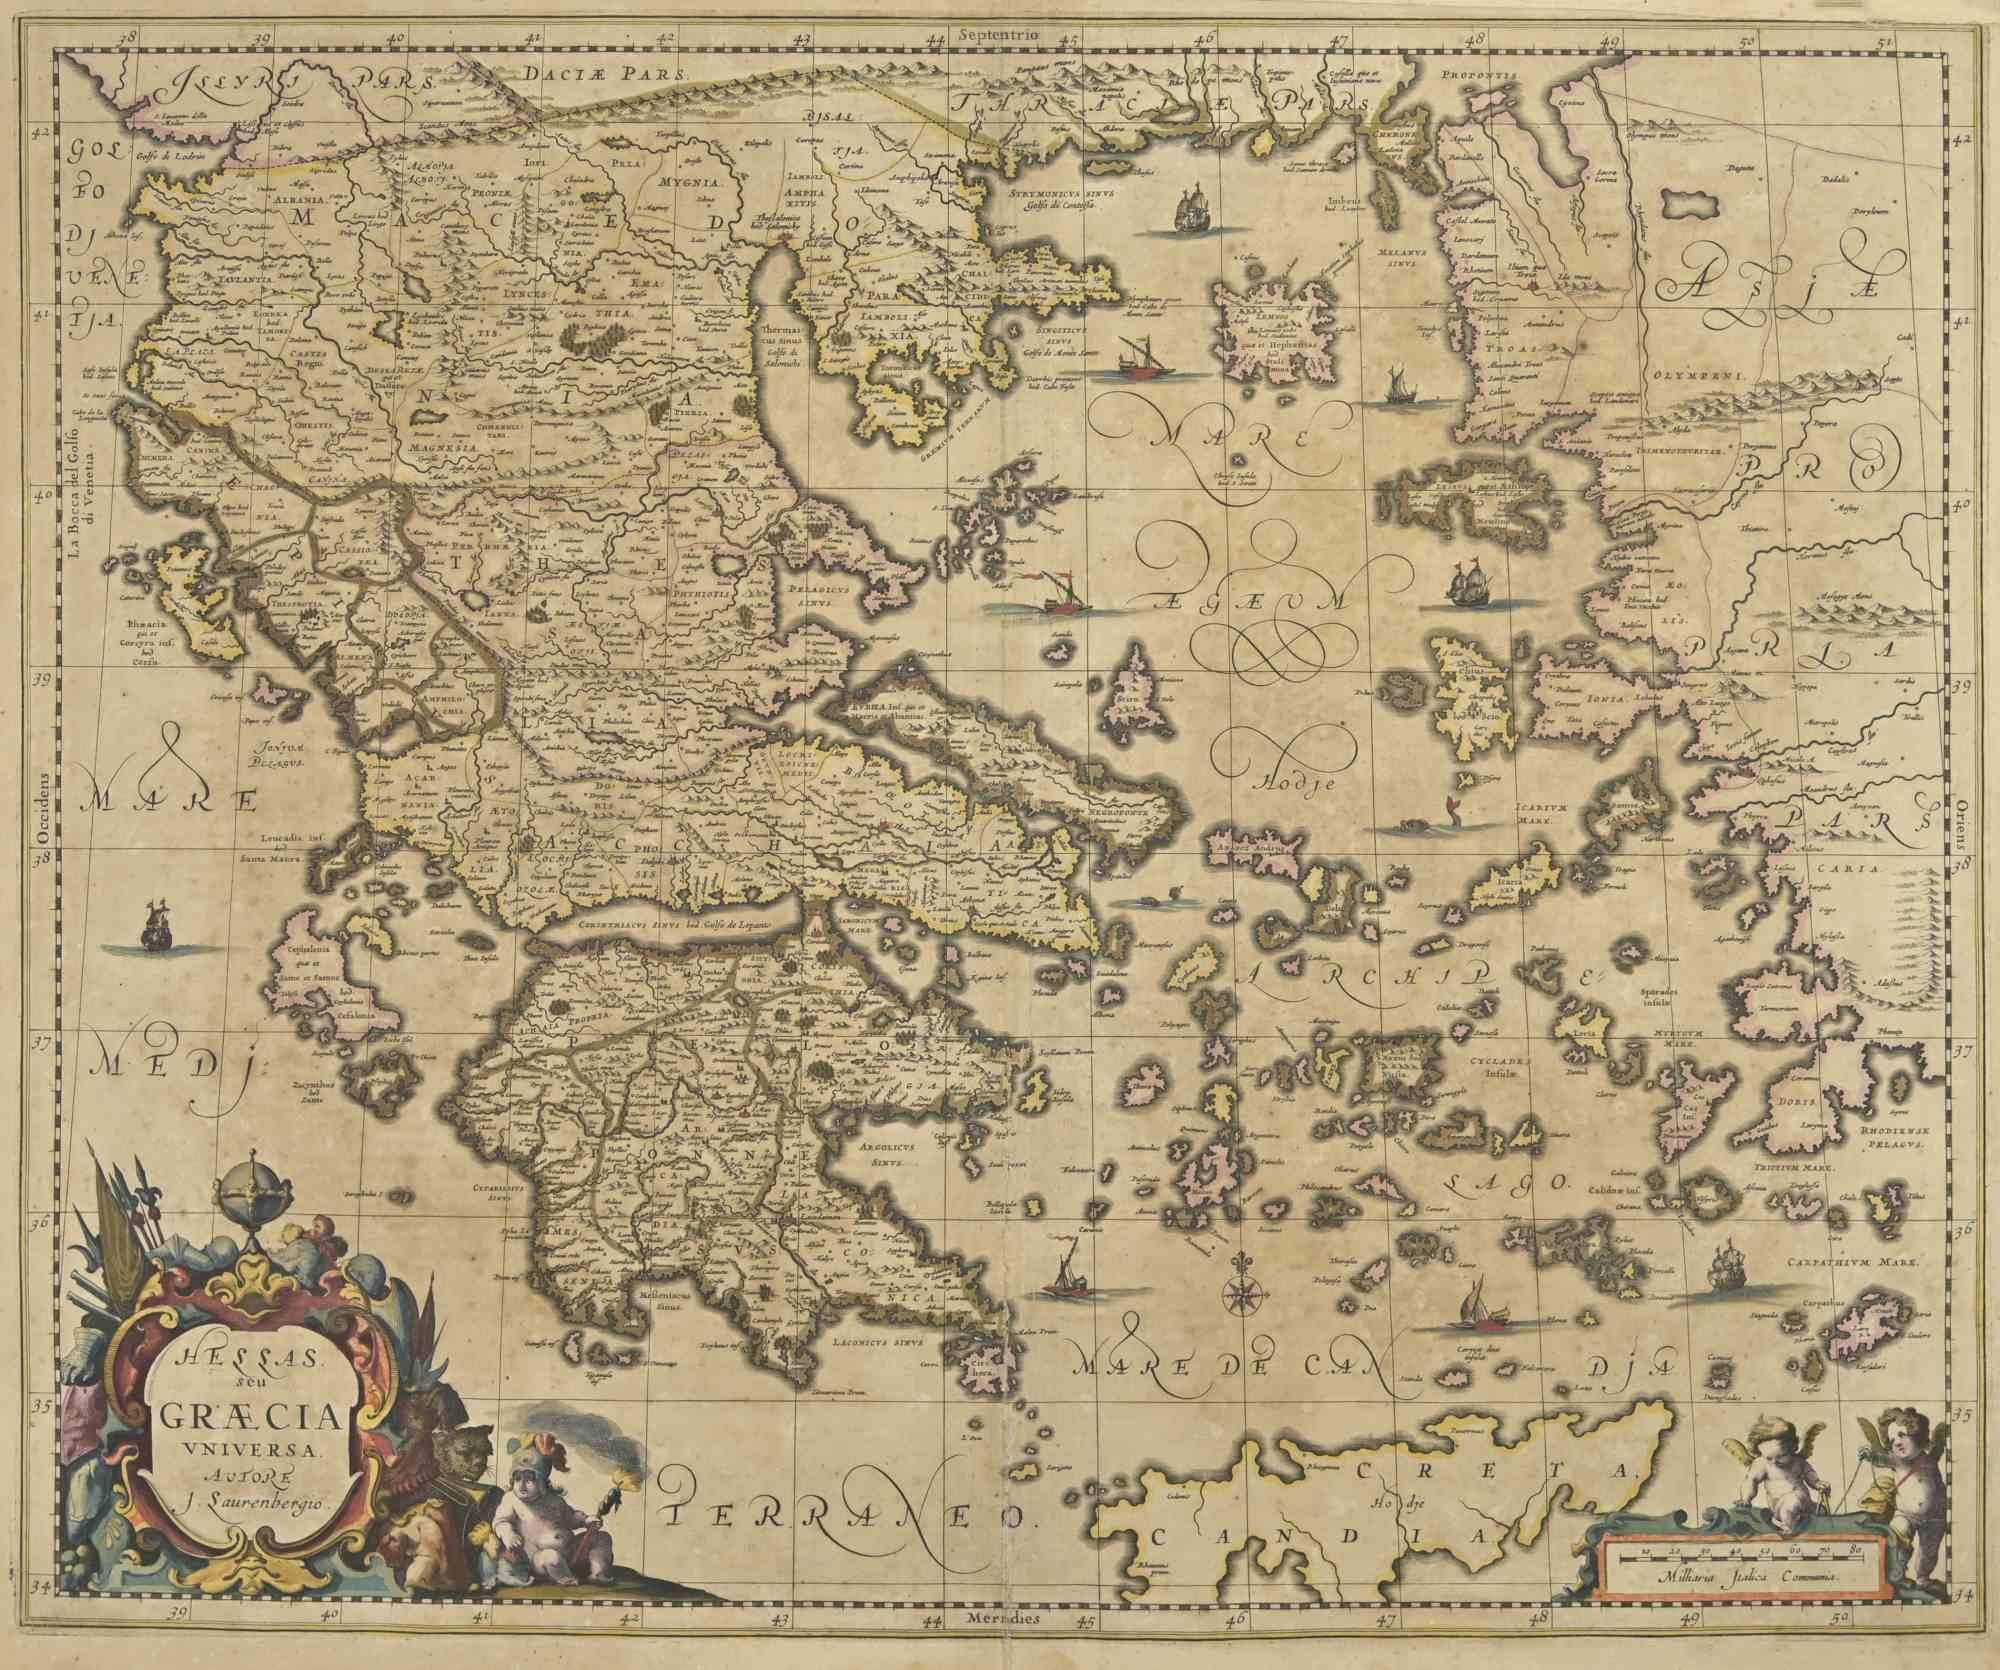 Antique Map of Greece  - Graecia Vniversa is an antique map realized in 1650 by Johannes Janssonius (1588-1664).

The Map is Hand-colored etching, with coeval watercoloring.

Good conditions with slight foxing.

From Atlantis majoris quinta pars,